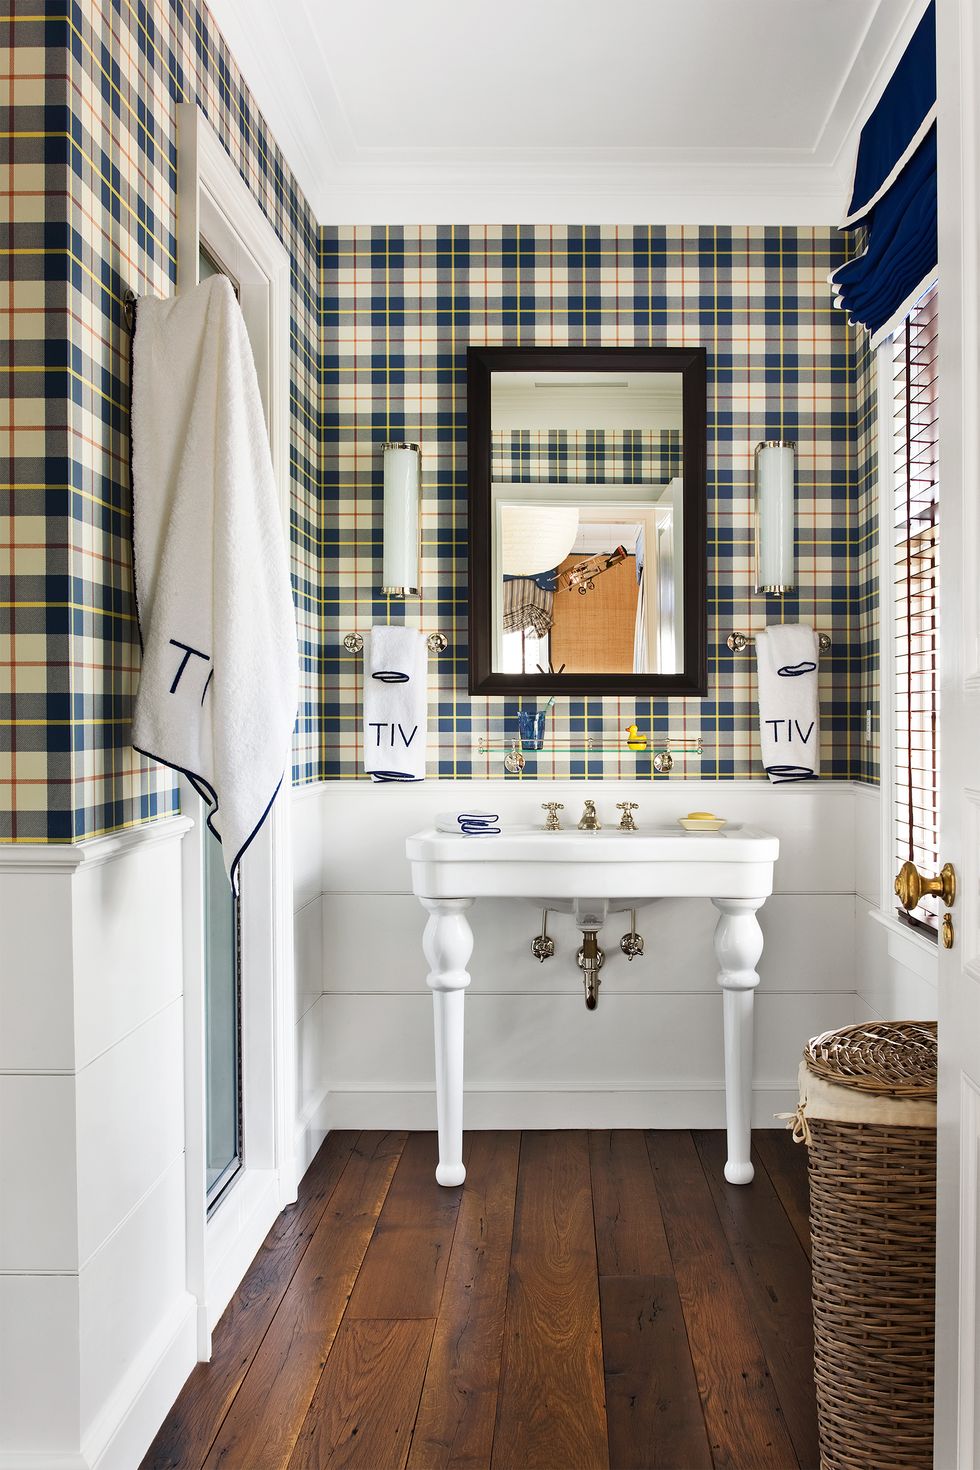 41 Bathroom Accent Wall Ideas to Energize Your Space